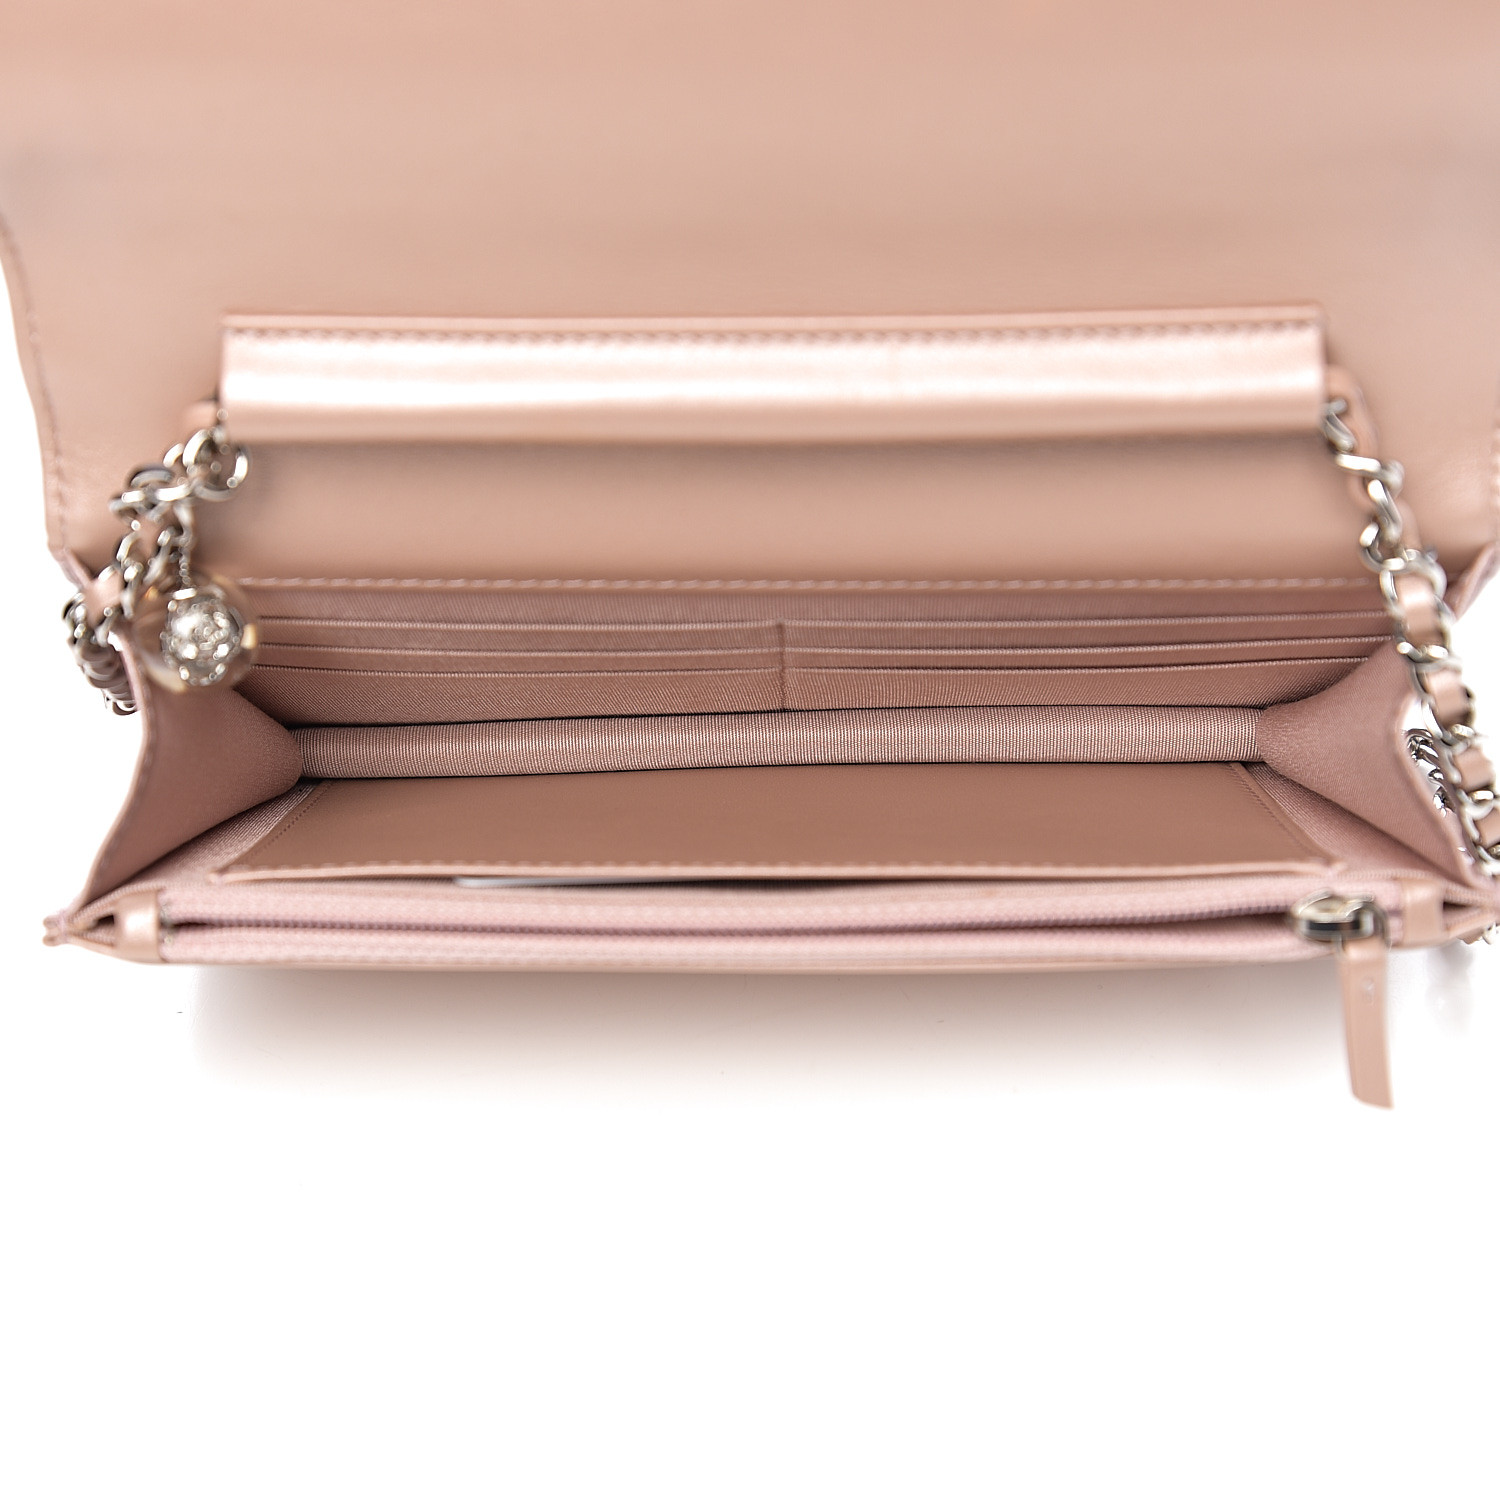 CHANEL Goatskin Camellia Embossed Wallet On Chain WOC Light Pink 556406